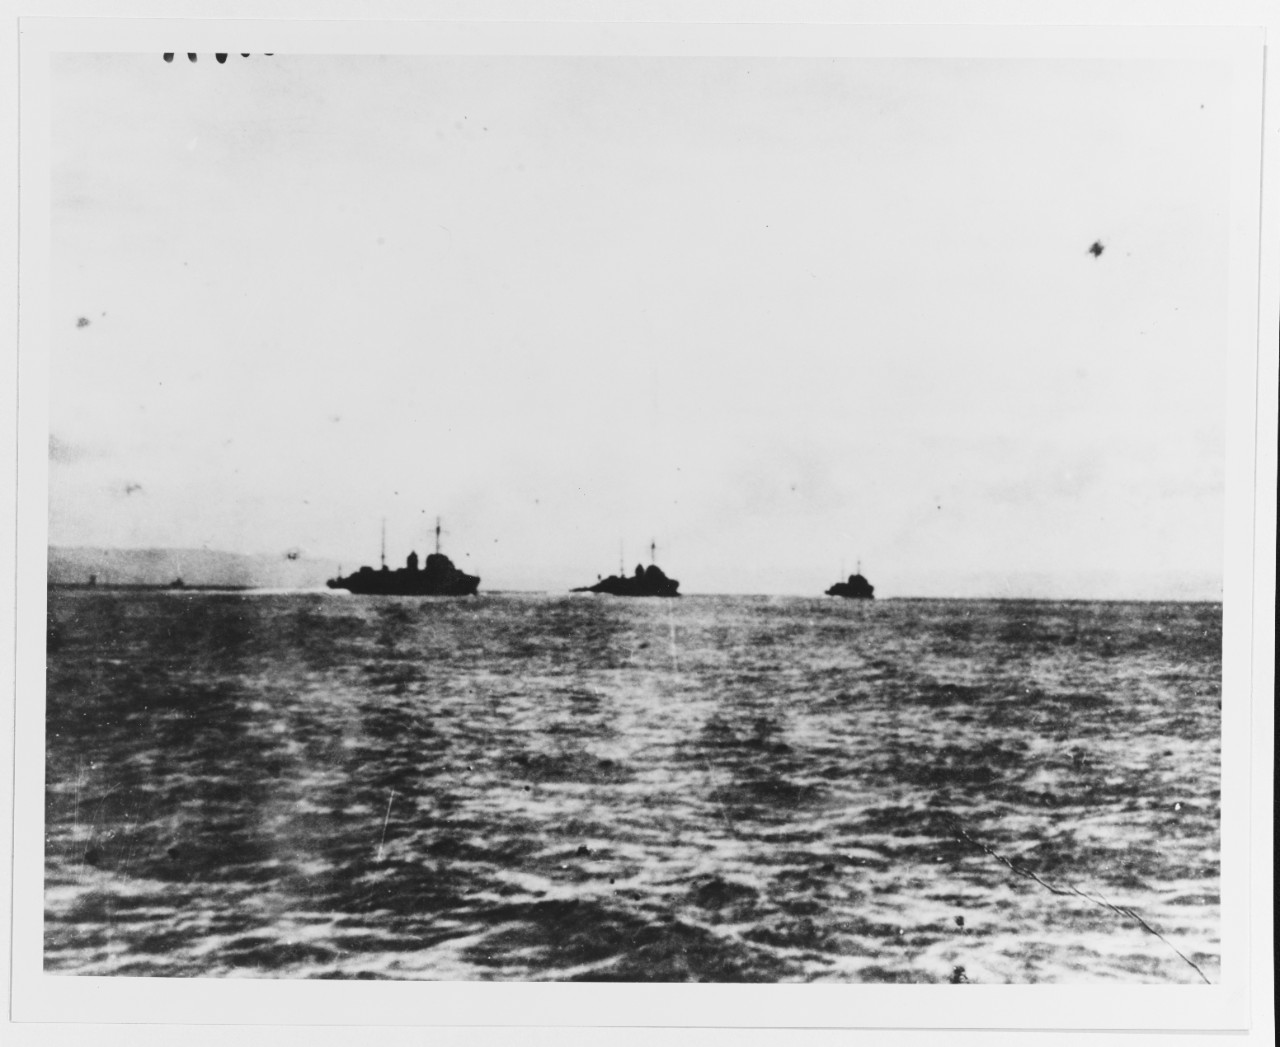 Japanese Navy destroyers